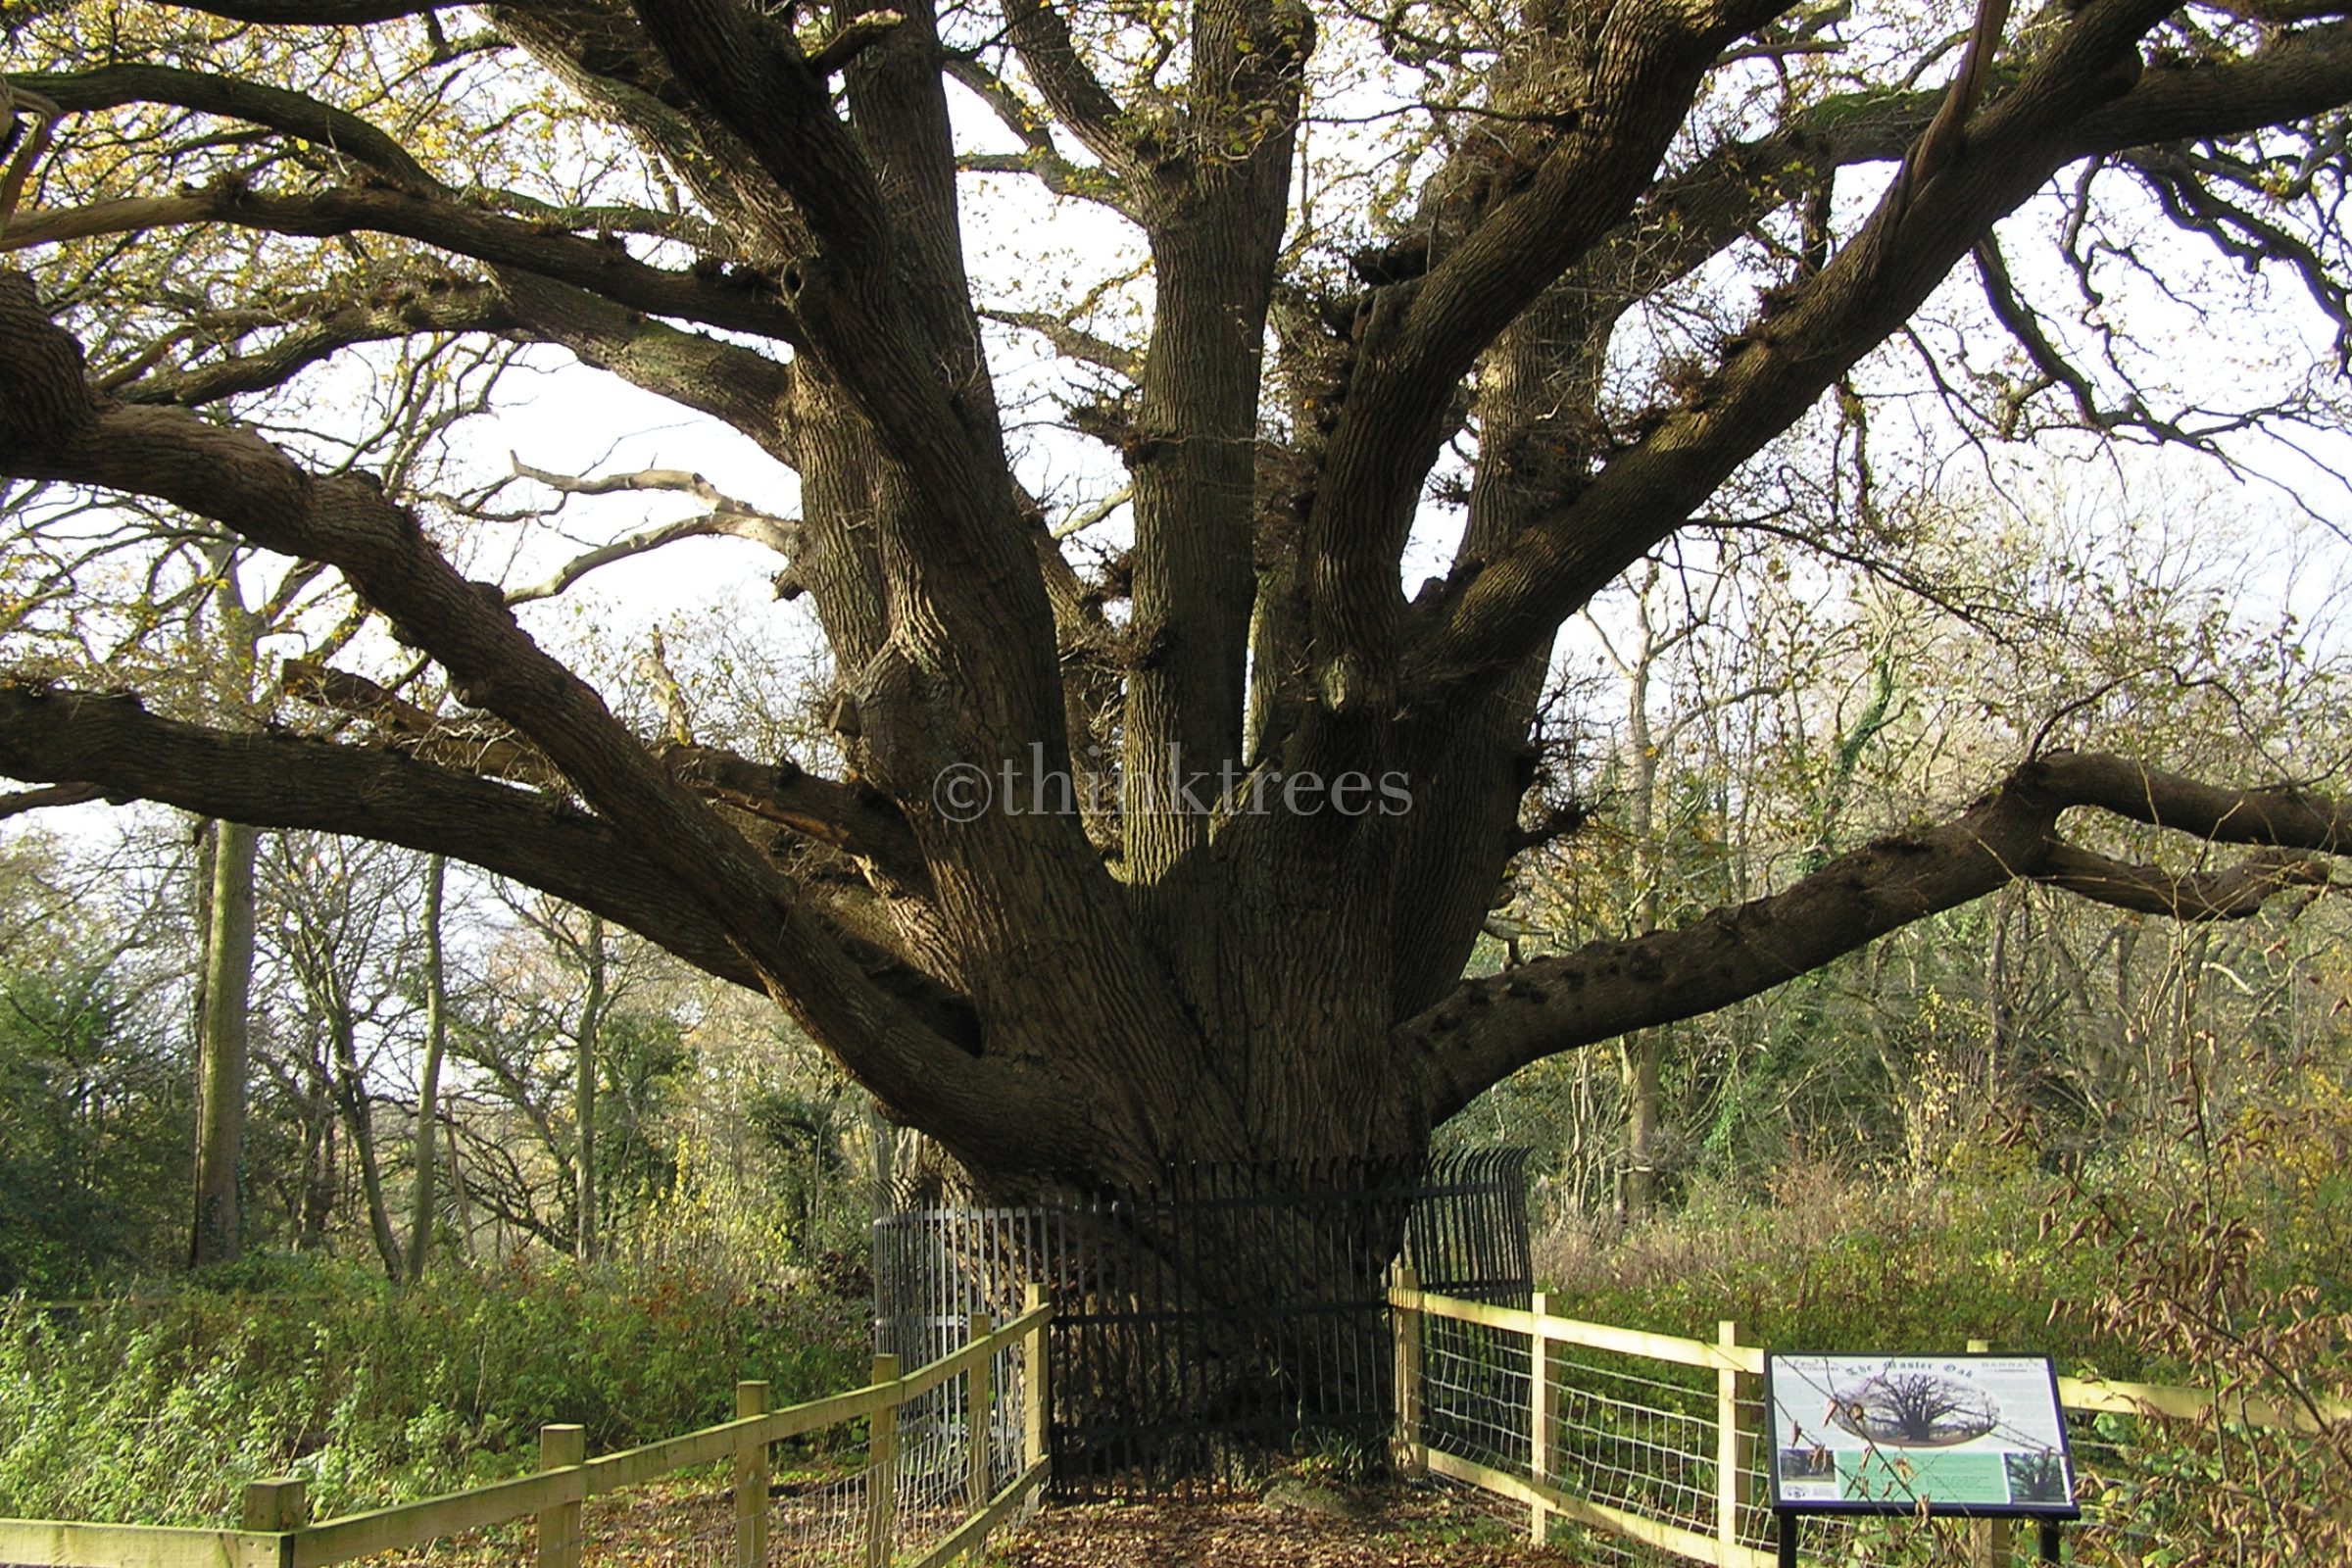 The enormous trunk of the ancient oak at Bentley Priory